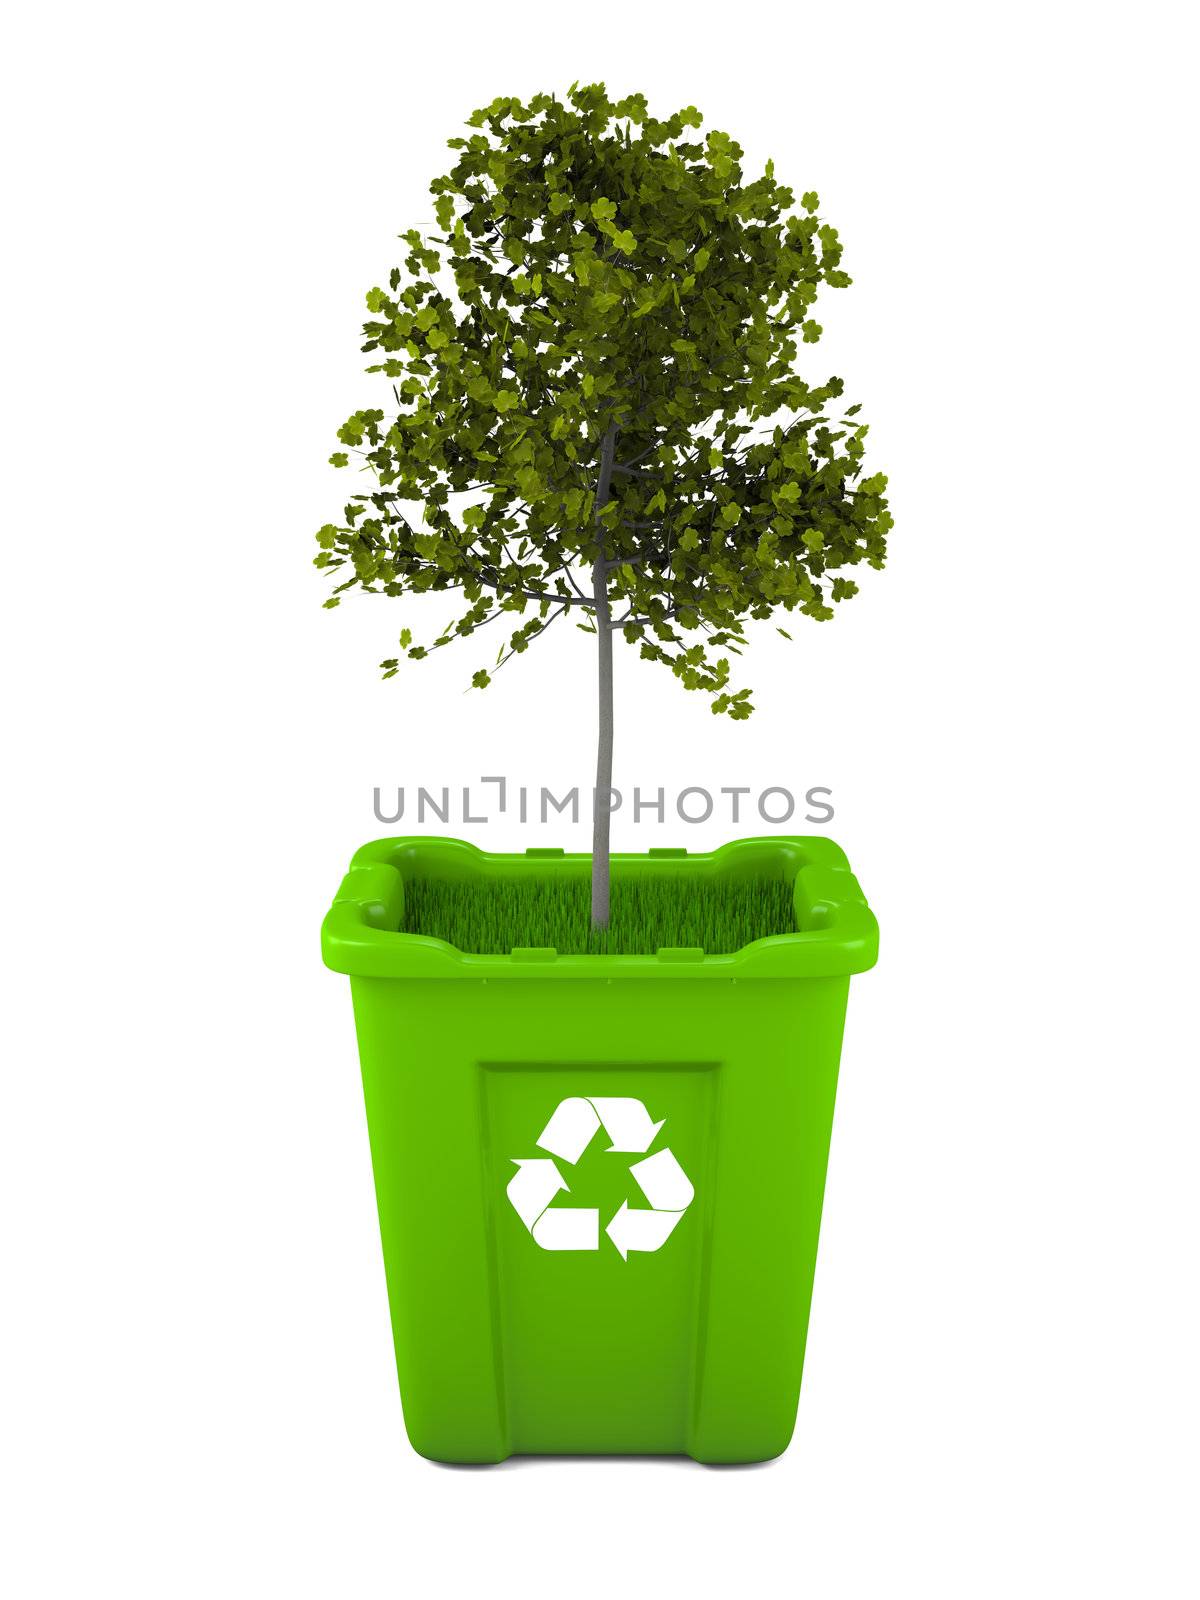 Paper recycling concept with Italian Maple tree growing from green recycle bin